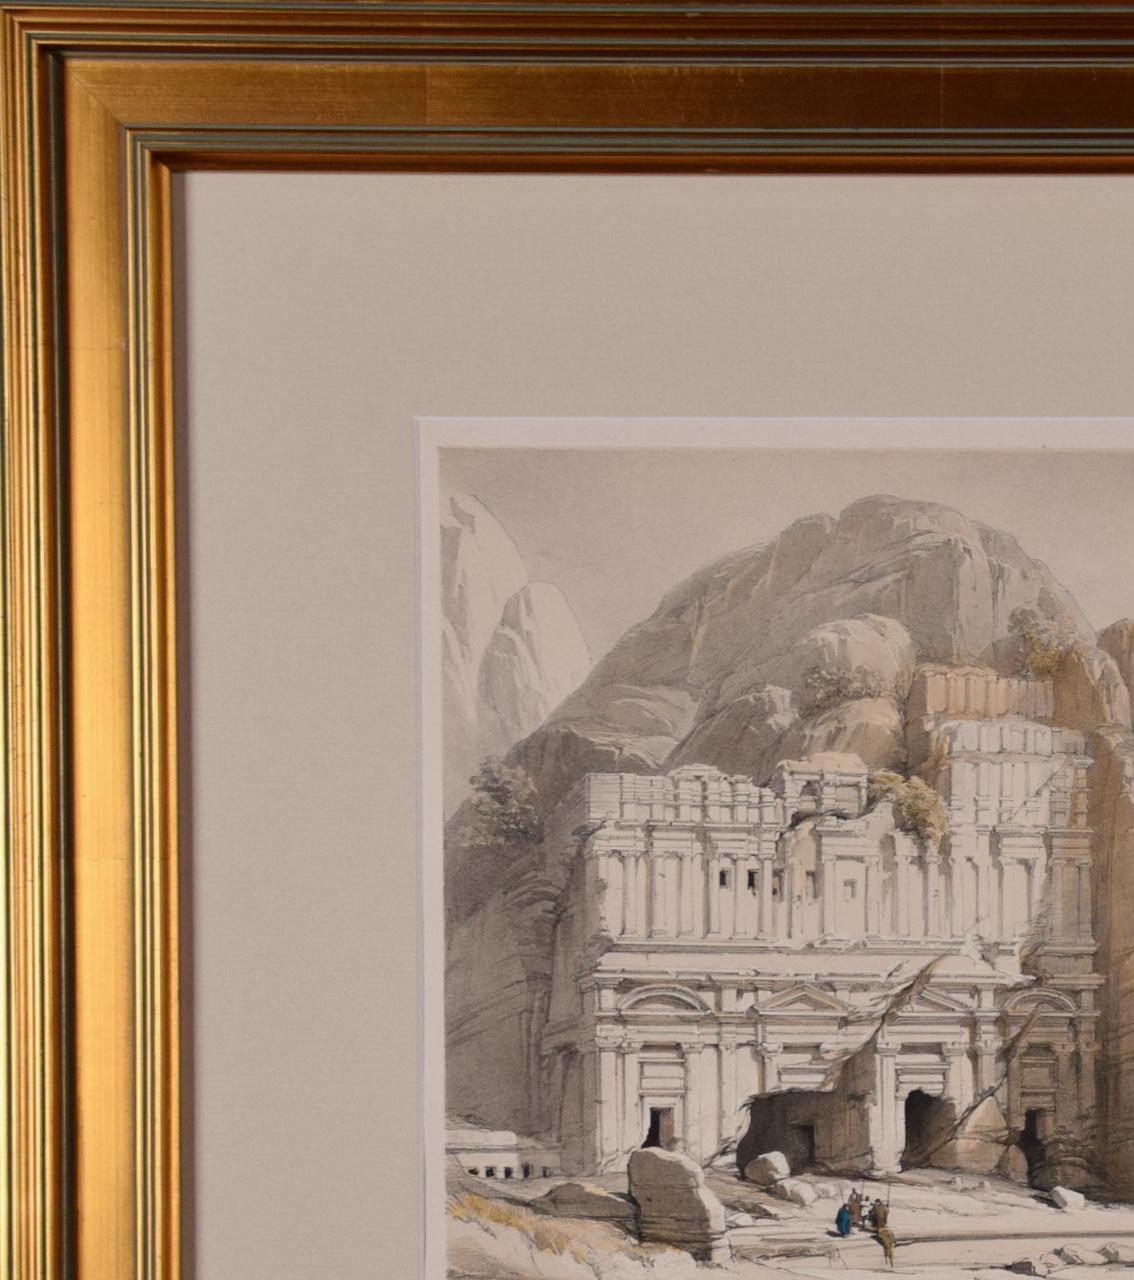 Petra, The Upper or Eastern Valley: 19th C. Hand-colored Roberts Lithograph - Realist Print by David Roberts